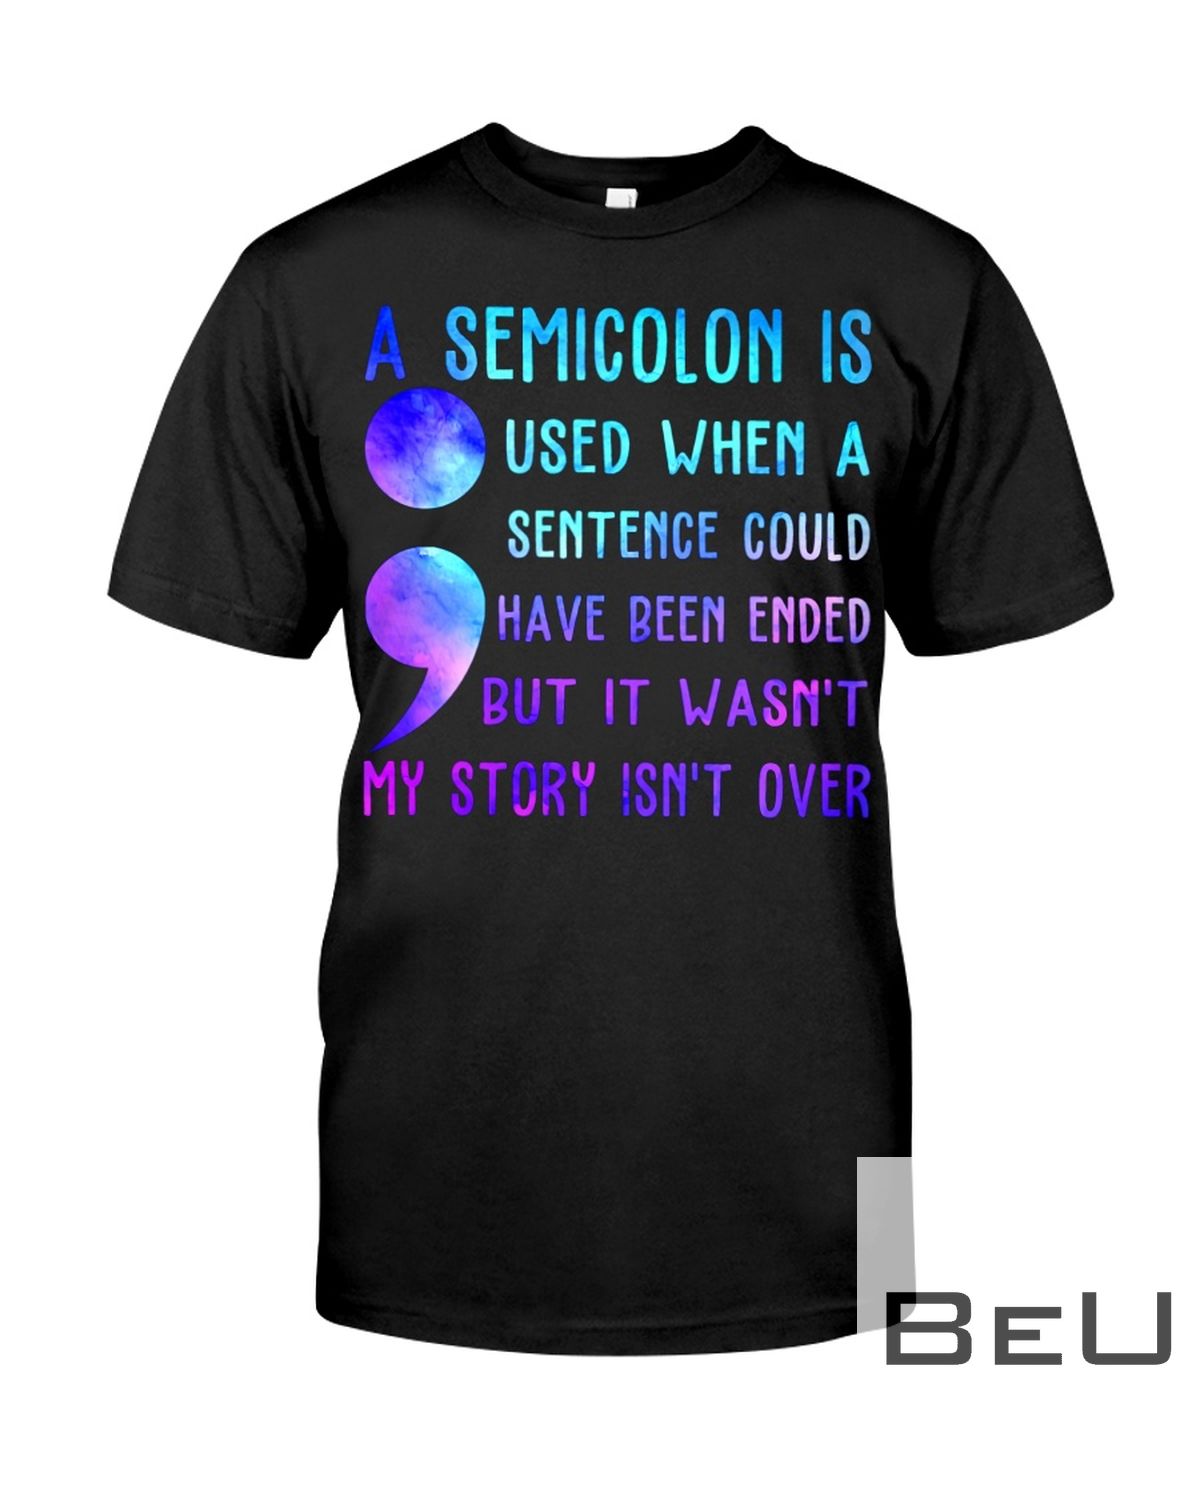 A Semicolon Is Used When A Sentence Could Have Been Ended But It Wasn't My Story Isn't Over Shirt